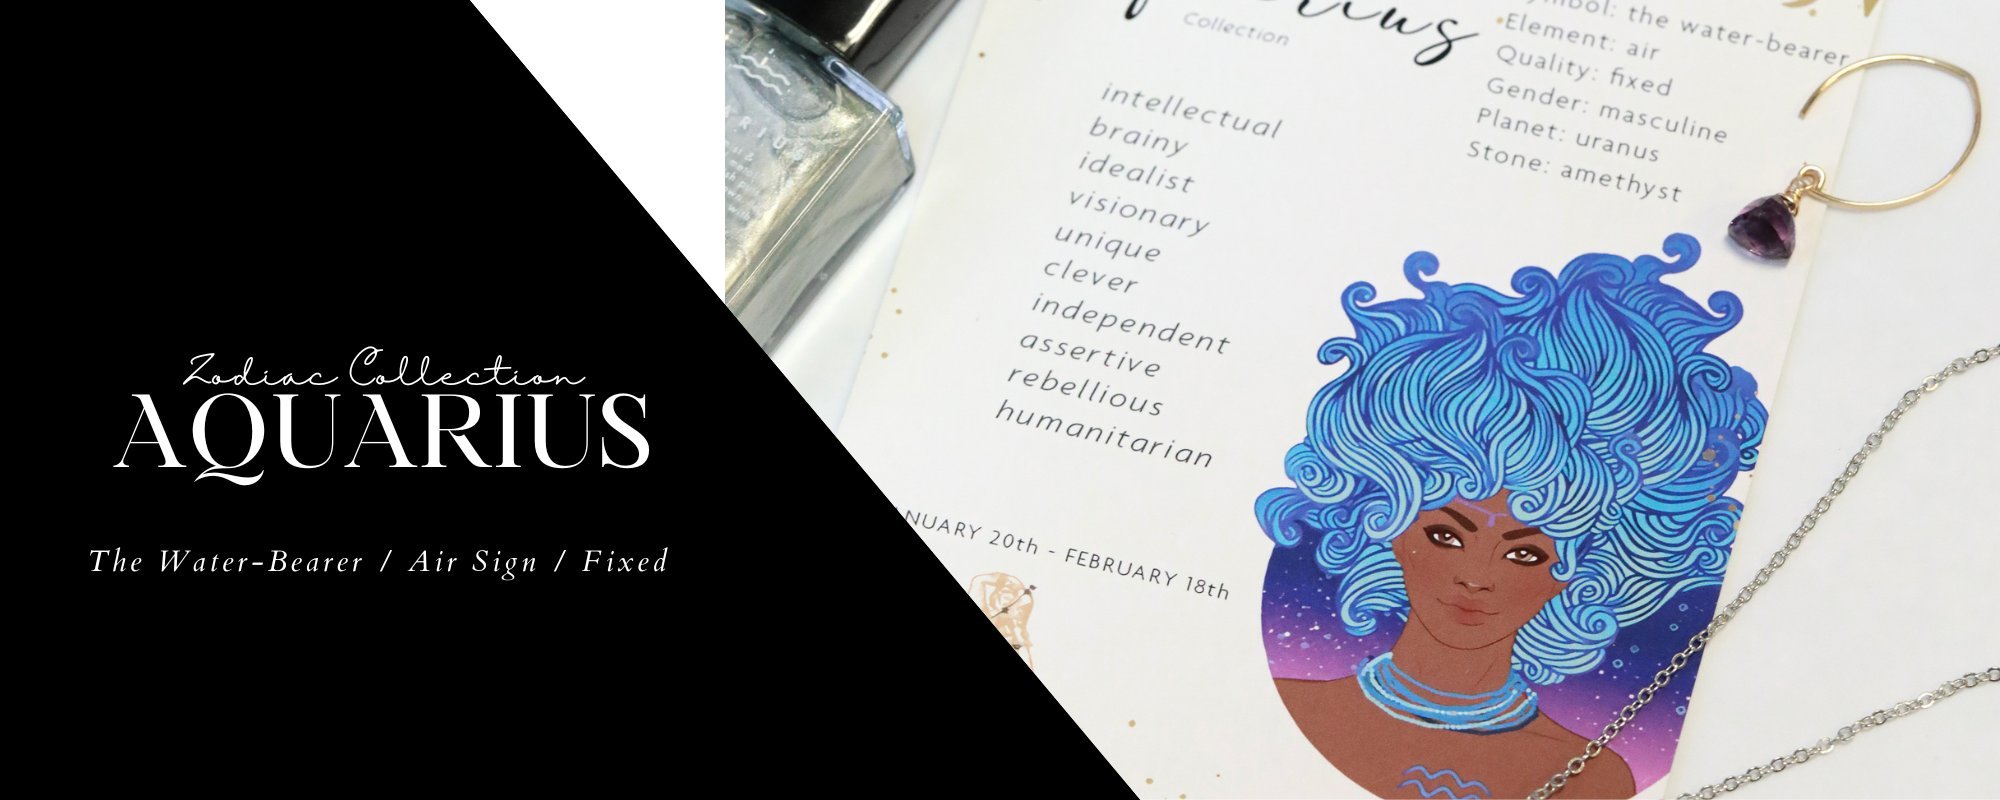 the aquarius zodiac sign gift collection image header